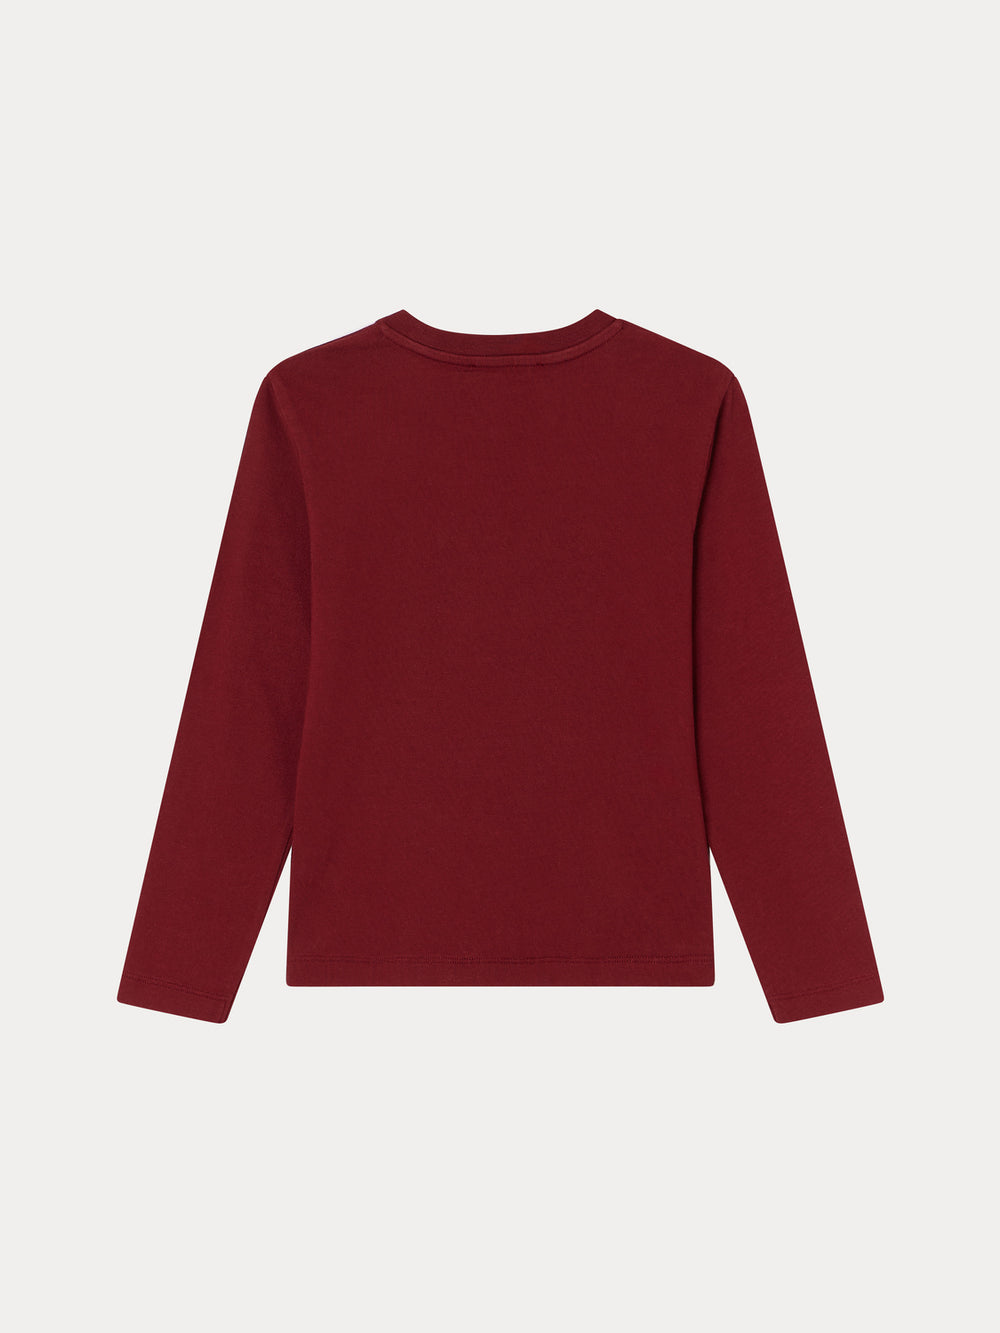 Theia T-shirt red